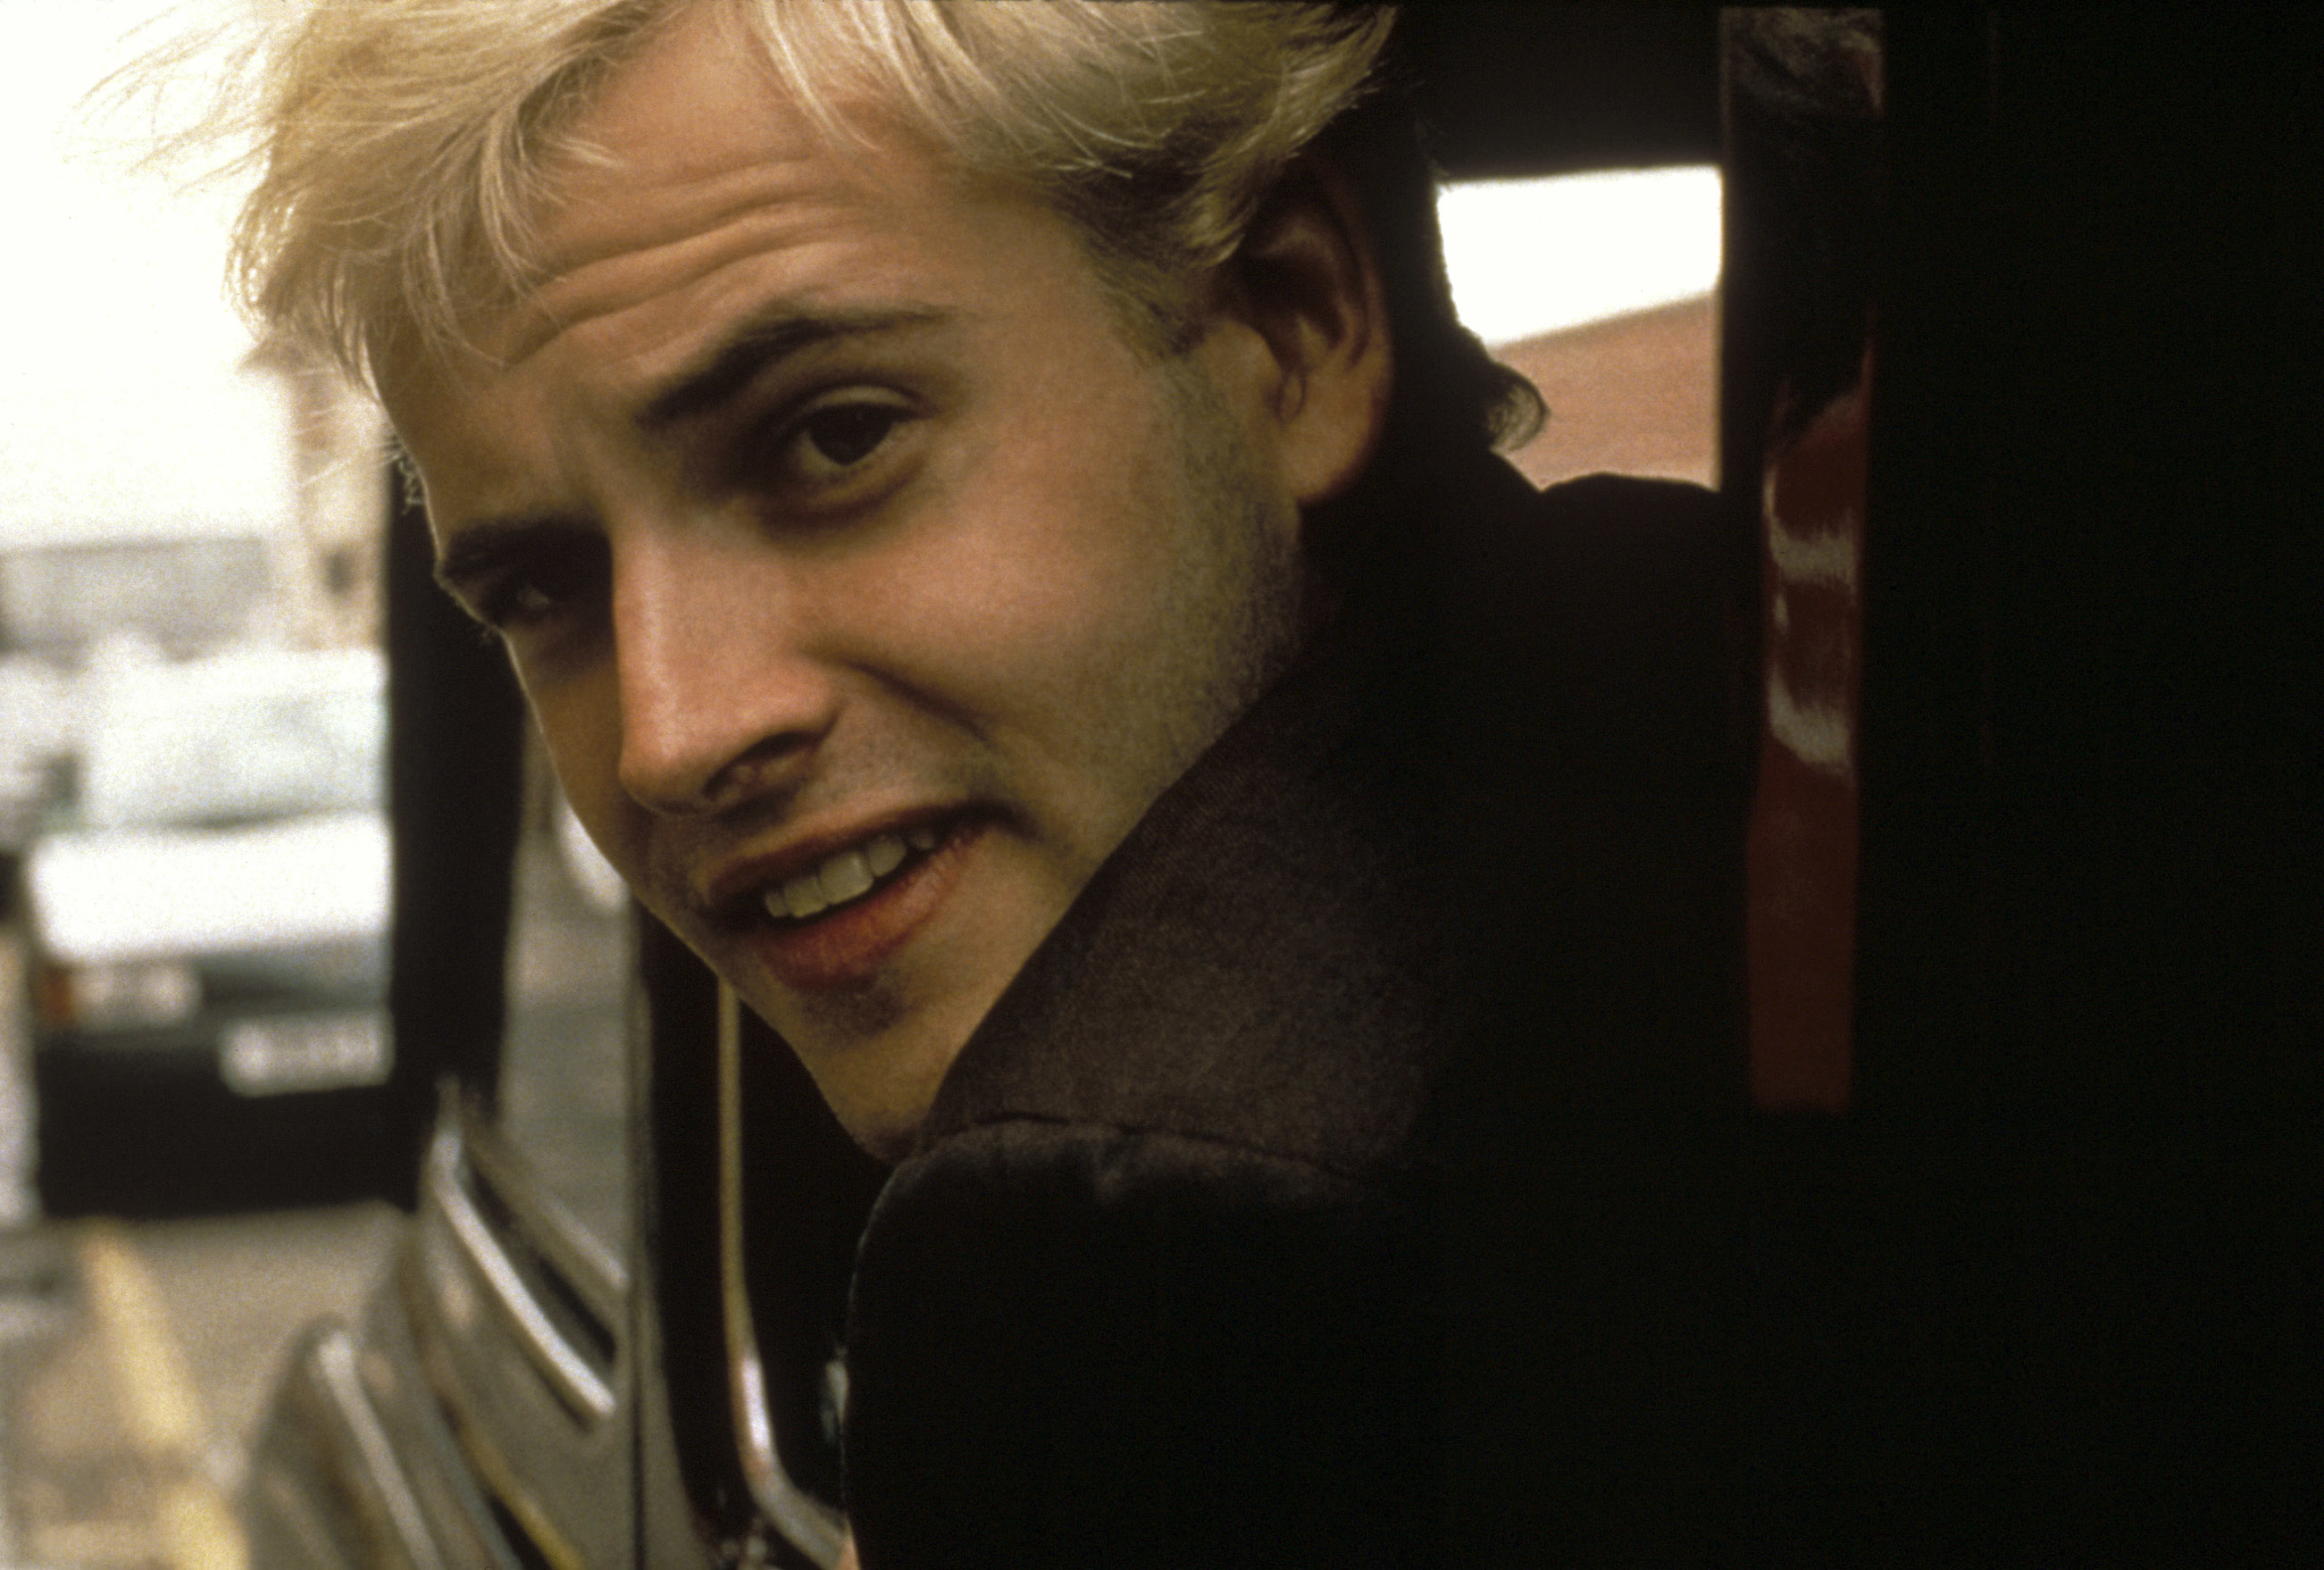 Young man with scruffy bleached blonde hair, looks out of a car window over his shoulder.